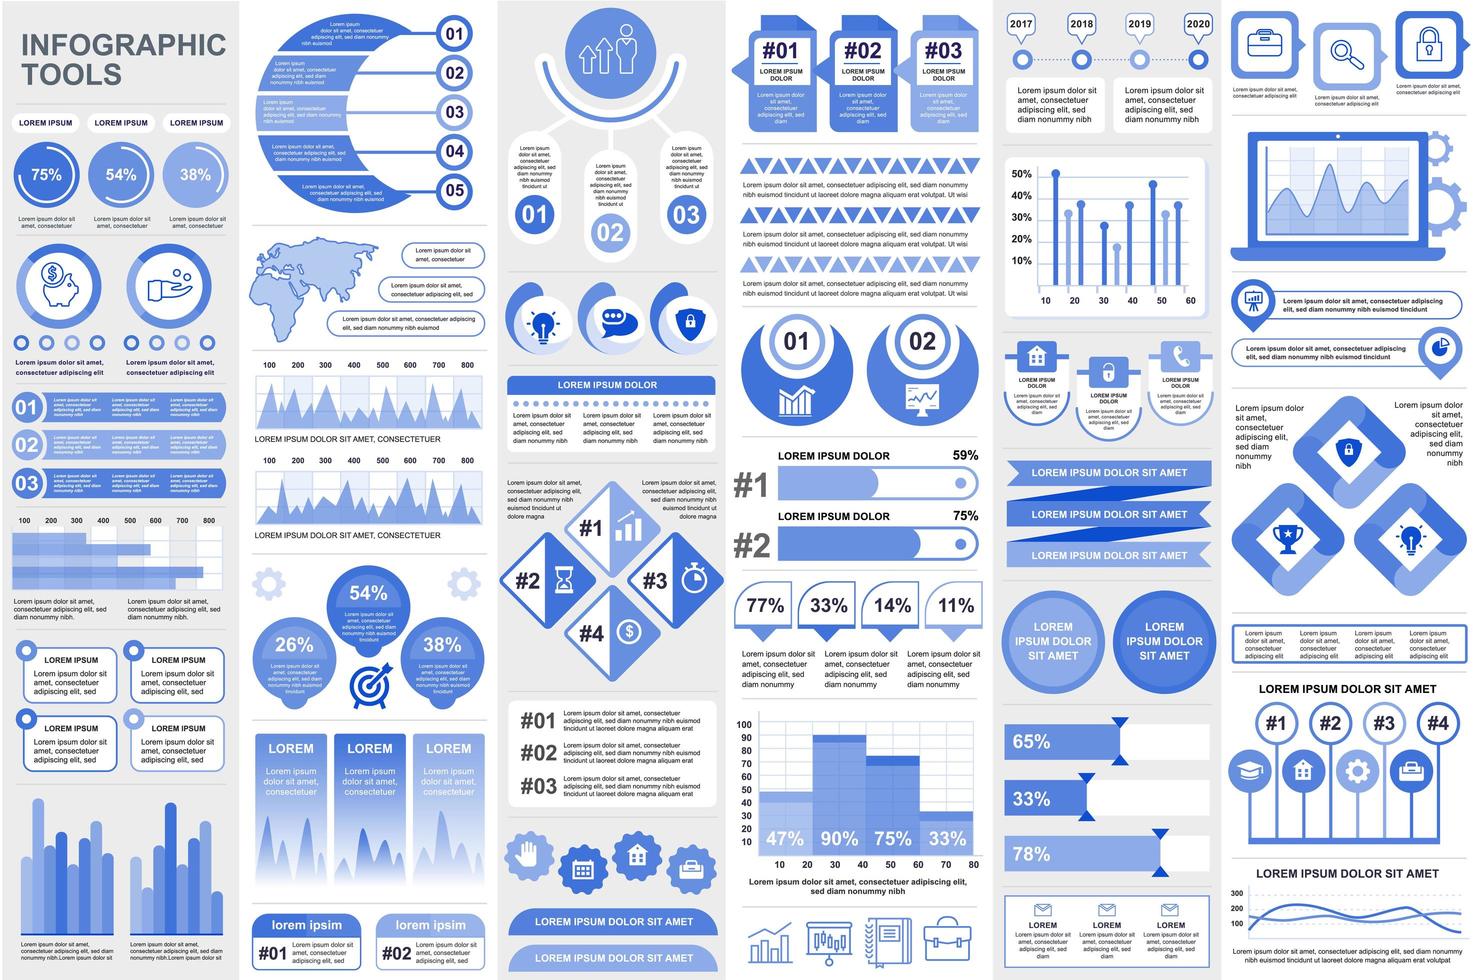 Collection infographic elements data visualization vector design